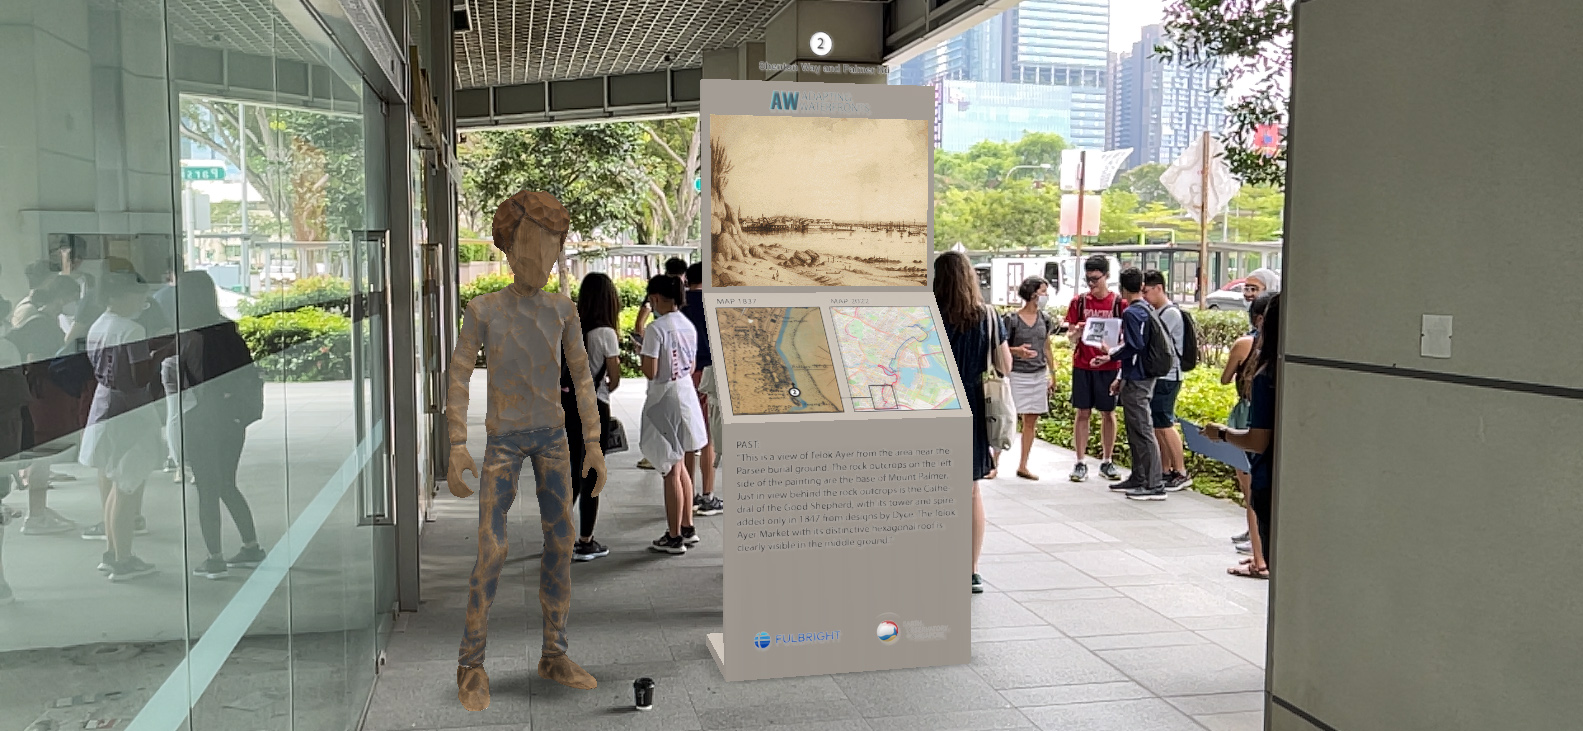 Image of Adapting Waterfronts AR Tour Site #2 – Augmented Reality Installation (Source: Gabriel Kaprielian)